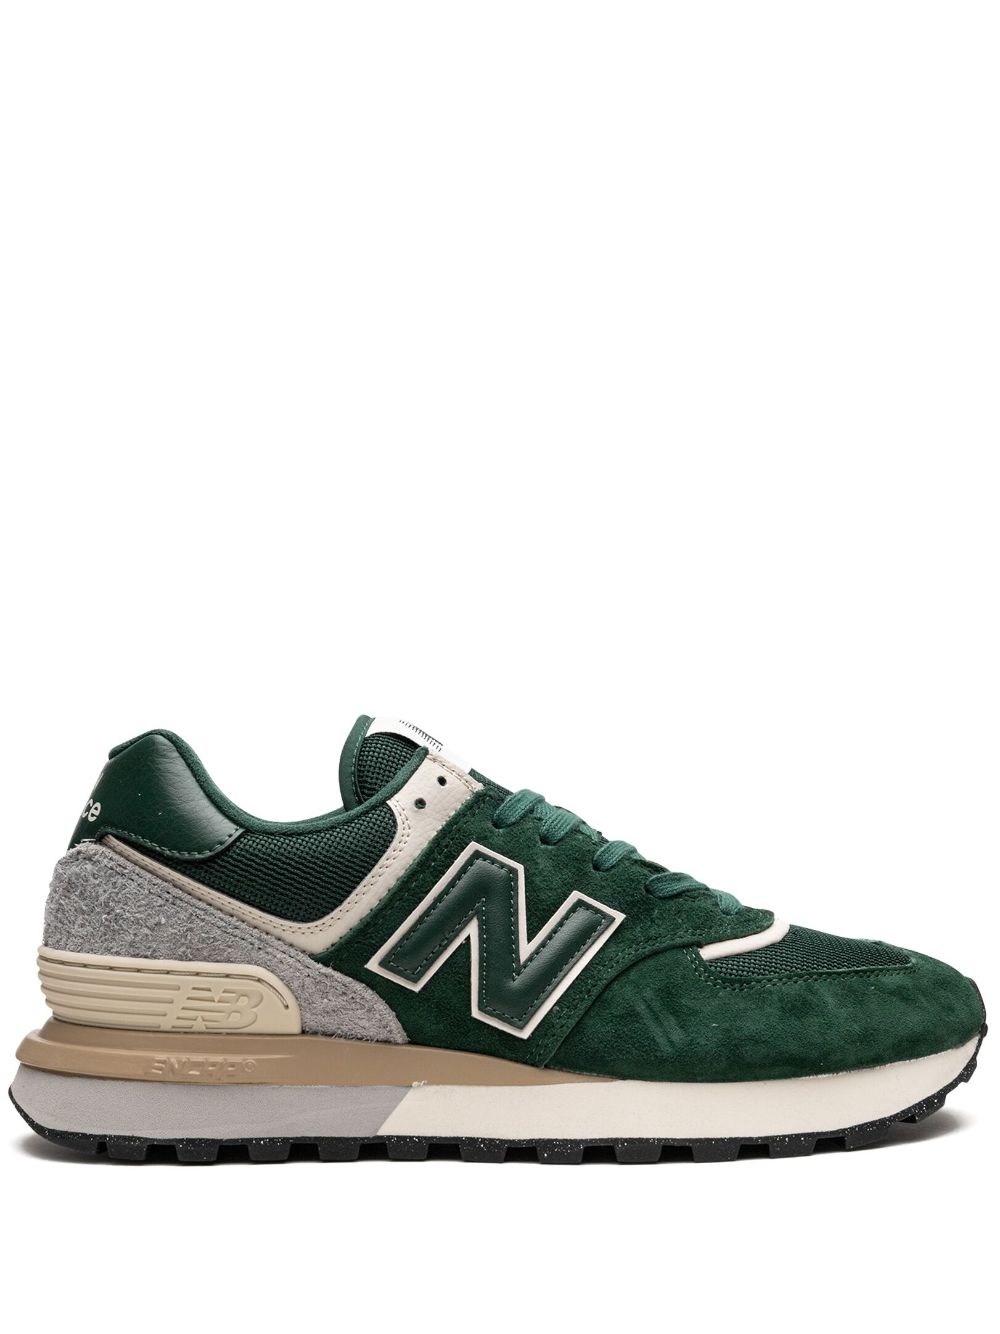 New Balance 574 Legacy "Green Silver" sneakers von New Balance